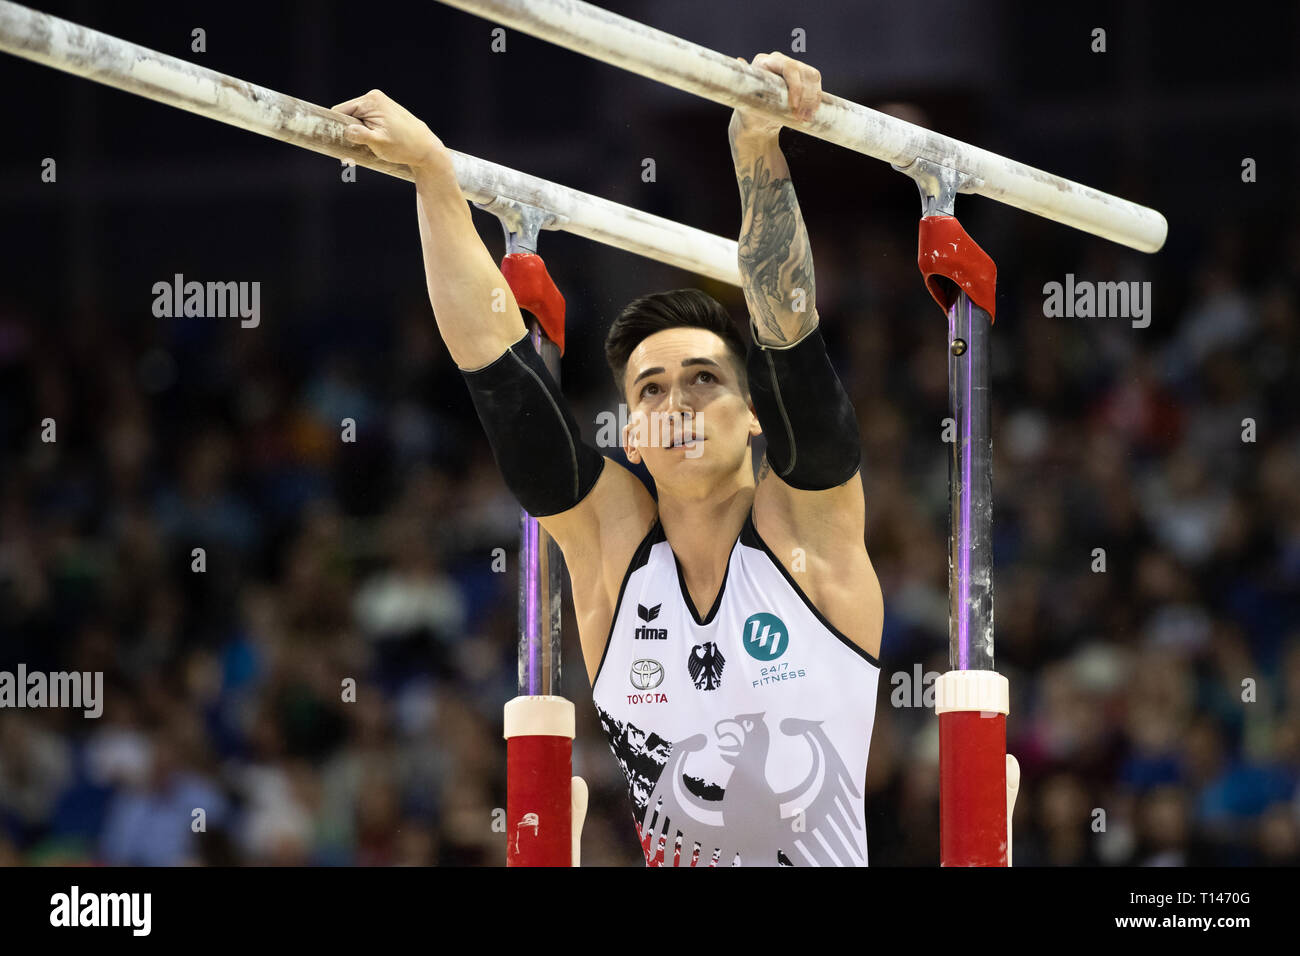 London, UK. 23rd March, 2019. Marcel Nguyen performs on the Parallel Bars during the Matchroom Multisport presents the 2019 Superstars of Gymnastics at The O2 Arena on Saturday, 23 March 2019. LONDON ENGLAND. Credit: Taka G Wu/Alamy News Stock Photo